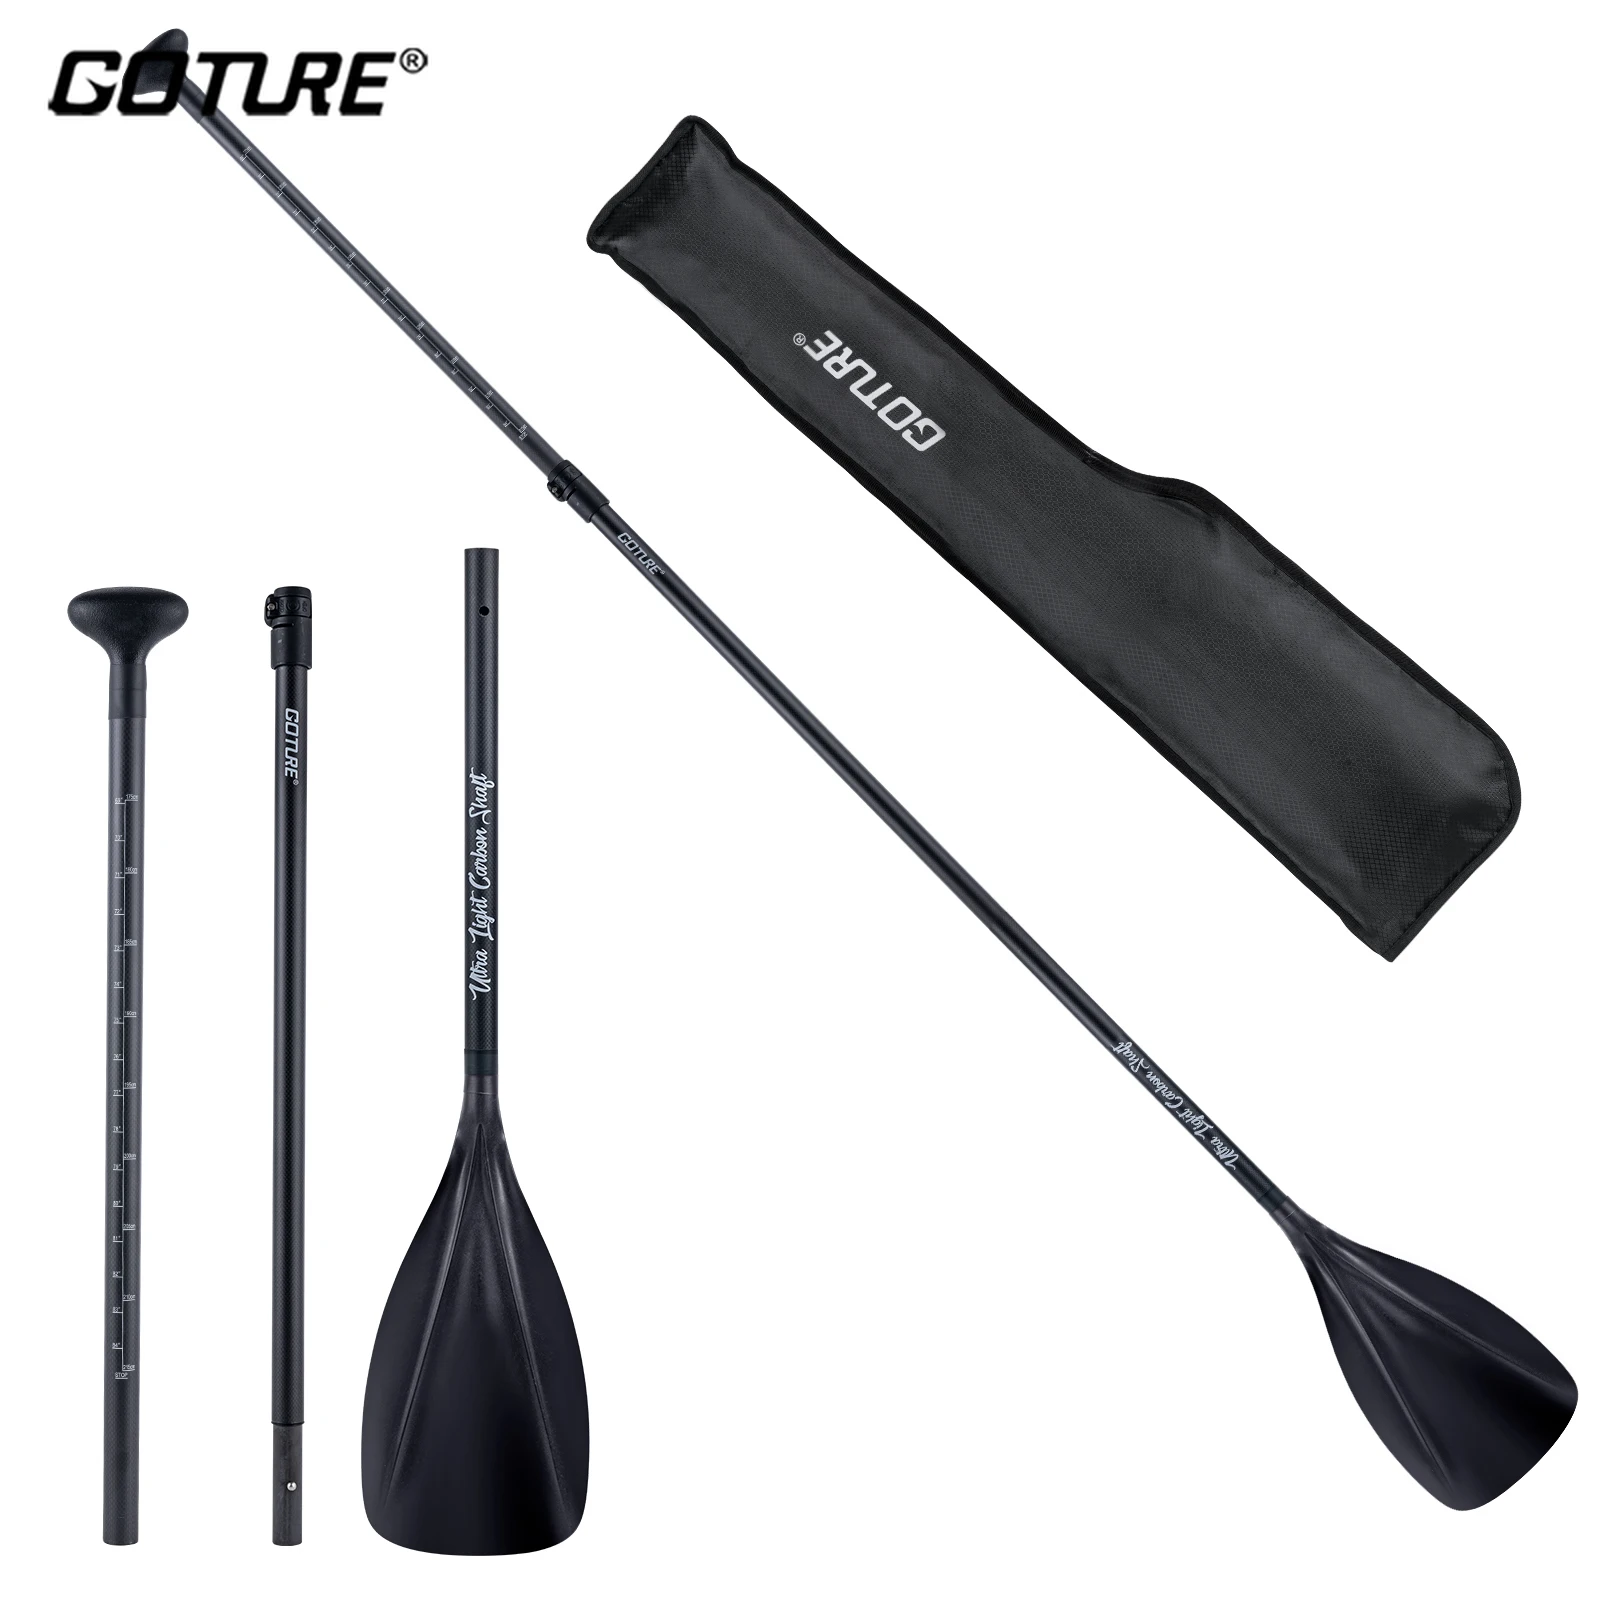 Goture SUP Paddle Full Carbon Fiber Shaft 3 Sections Ultra Light 170-215cm Adjustable Portable Stand Up Paddle Board Accessories